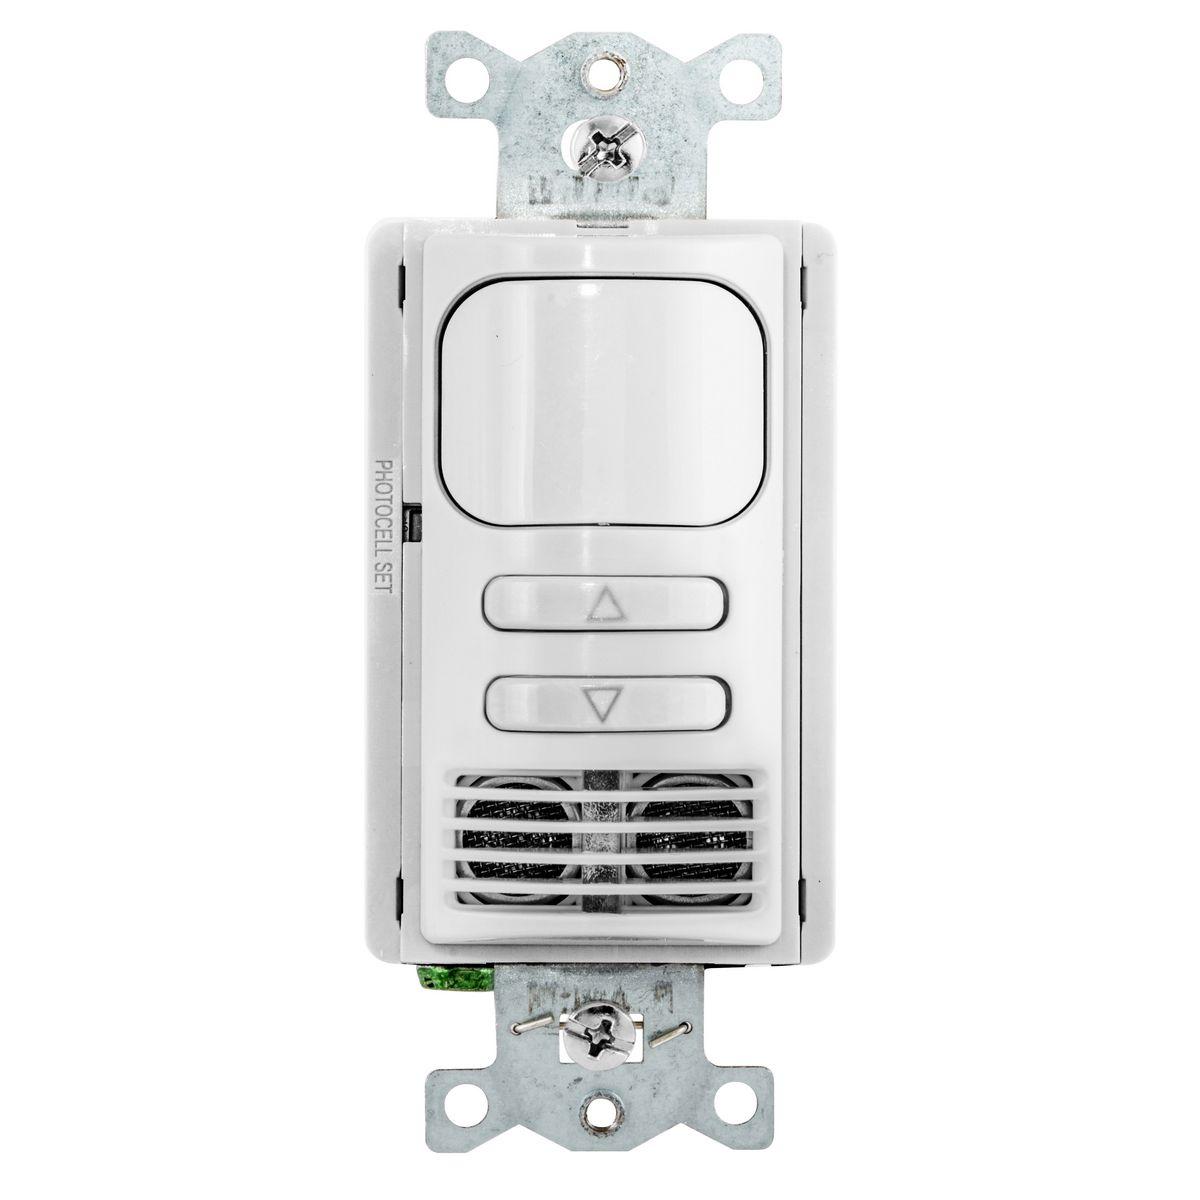 Hubbell ADD2001W1 Switches and Lighting Control, Wall Switch Occupancy Sensor, Dual Technology, 0-10V Dimming, Manual On ,1-Relay, 120/277VAC,White 